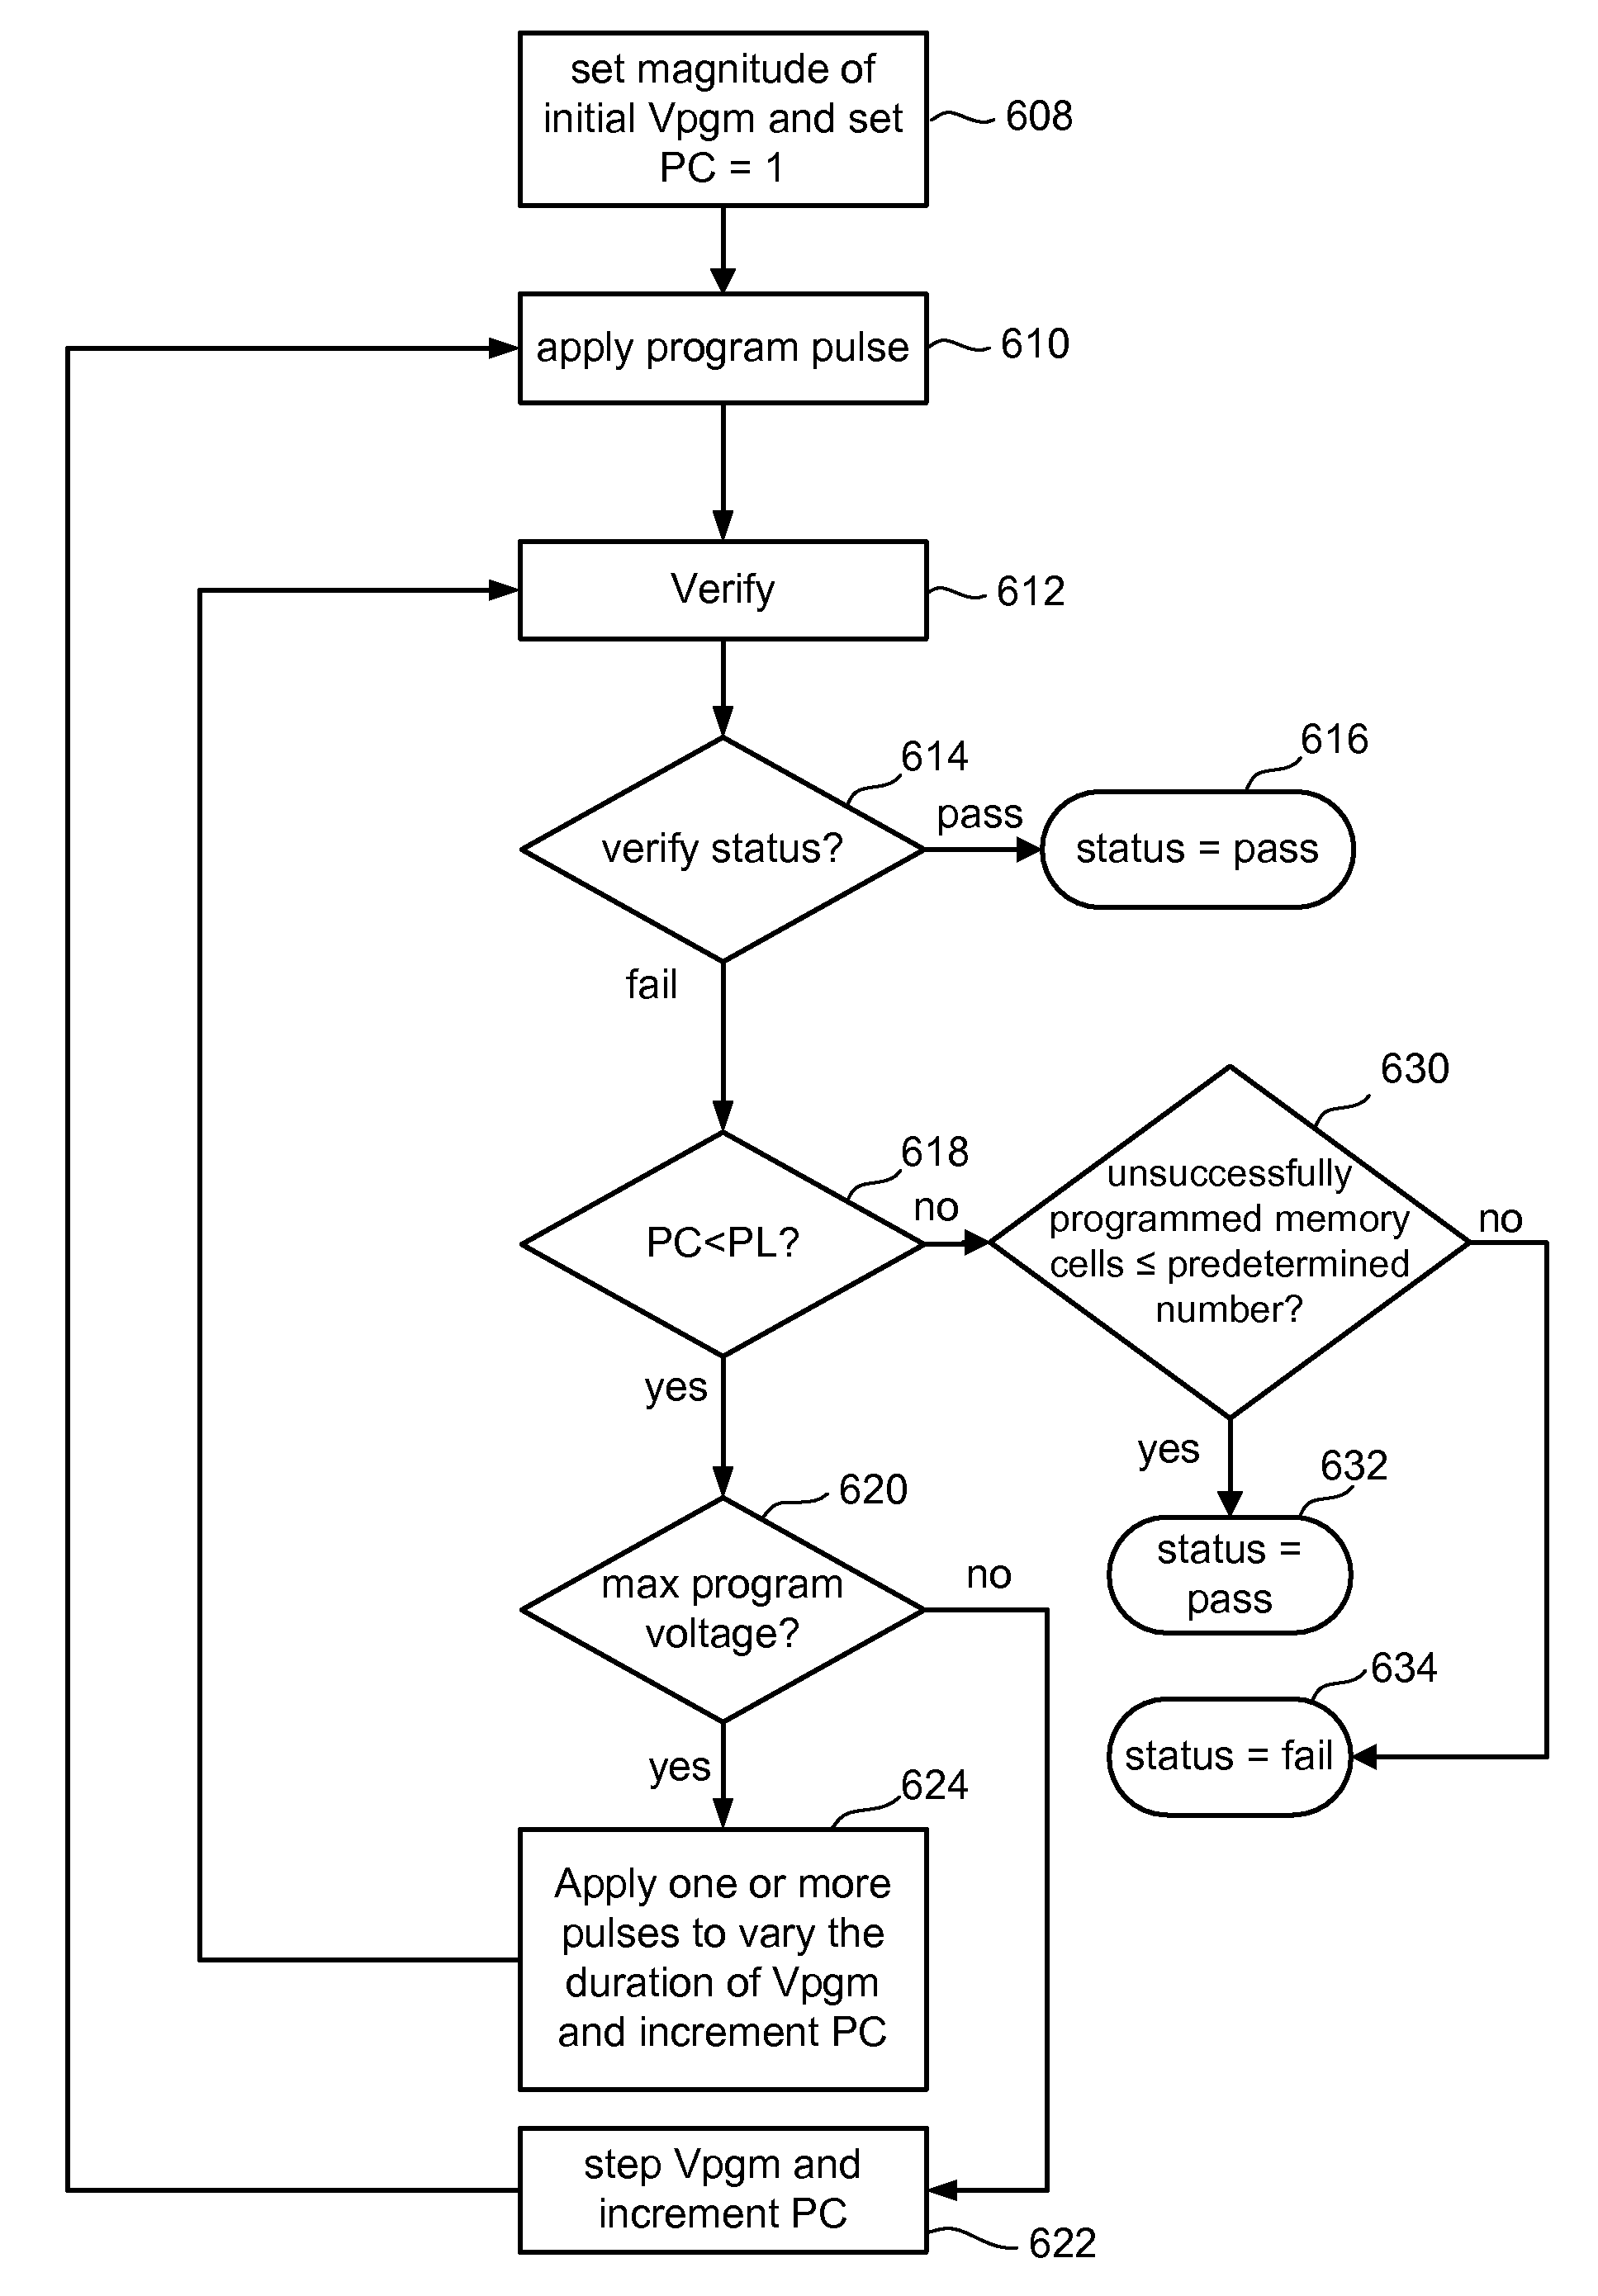 Non-volatile storage system with intelligent control of program pulse duration